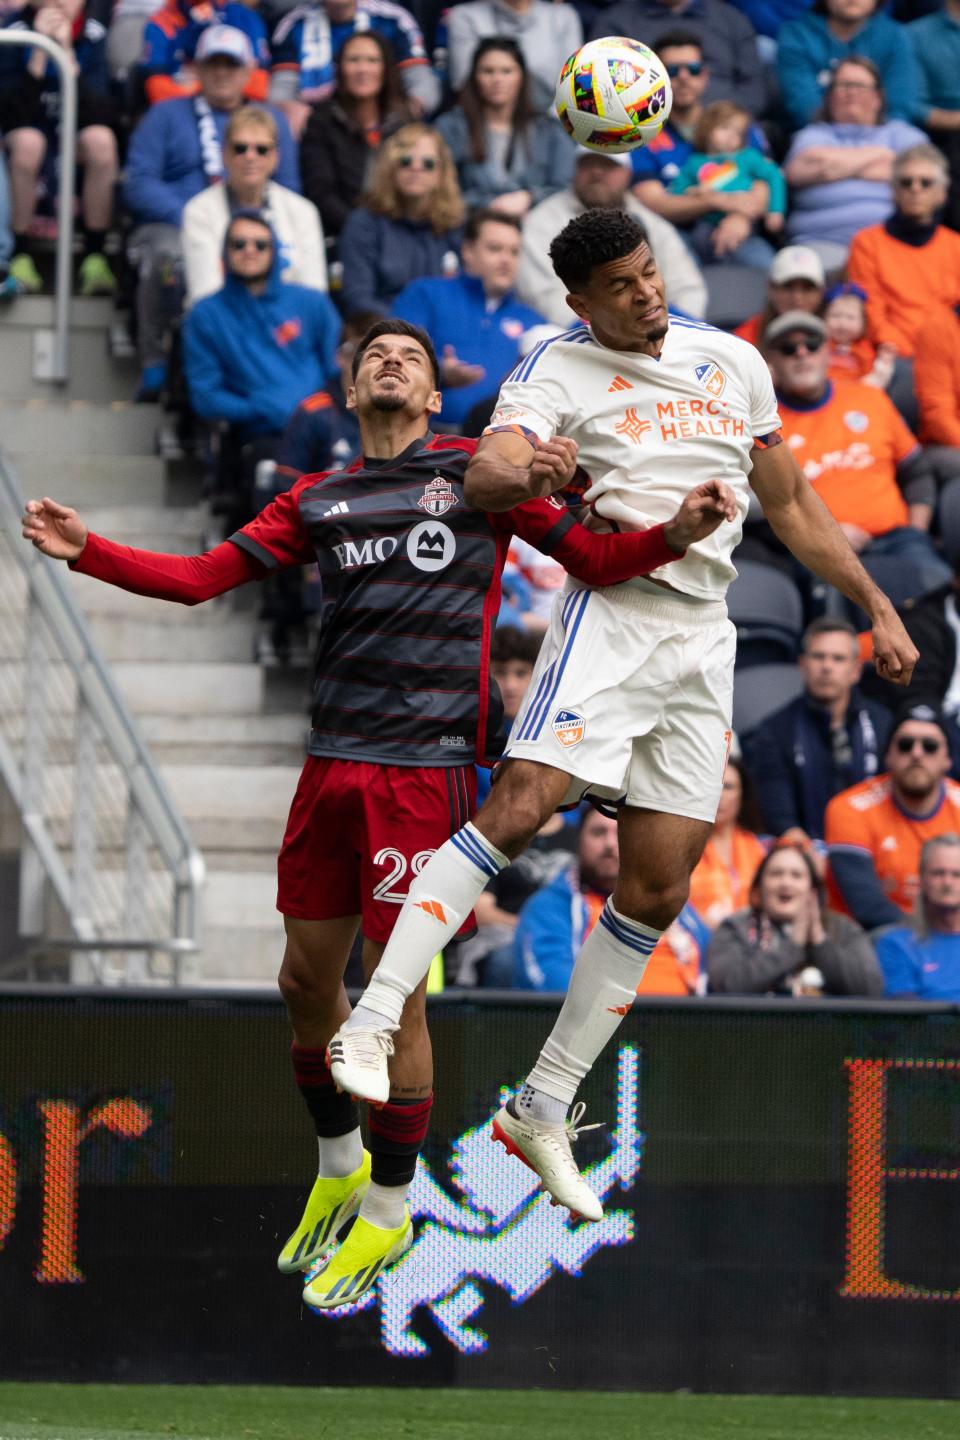 Defender Miles Robinson (12) heads the ball in the first half of Sunday's draw with Toronto FC. Robinson was among the newcomers making their MLS debut for FC Cincinnati.